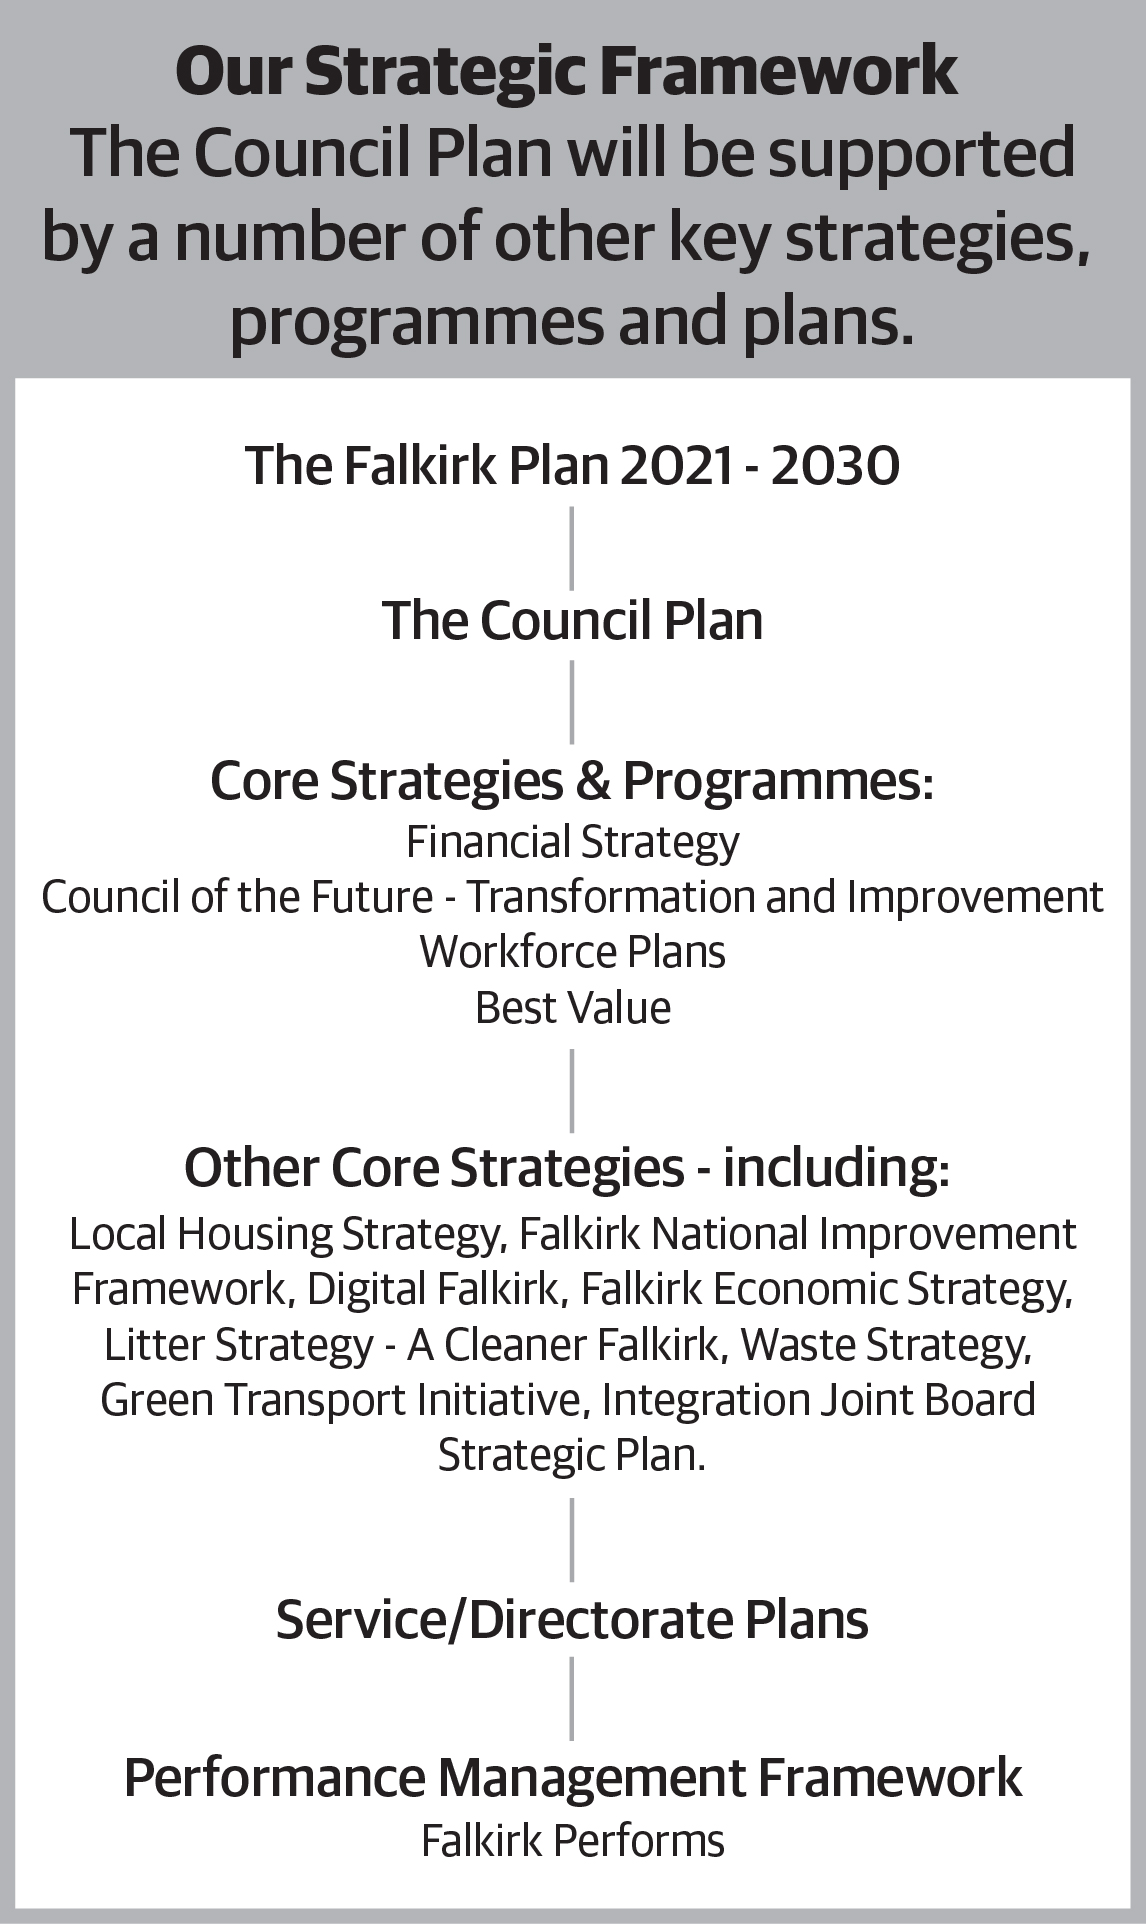 Our Strategic Framework. The Council Plan will be supported by a number of other key strategies, programmes and plans.
            The Falkirk Plan 2021-2030. The Council Plan. Core Strategies and Programmes: Financial Strategy, Coucil of the Future - Transformation and Improvement, Workforce Plans, Best Value. Other Core Strategies - including:
            Local Housing Strategy, Falkirk National Improvement Framework. Digital Falkirk, Falkirk Economic Strategy, Litter Strategy - A Cleaner Falkirk, Green Fleet Initiative, 
            Integration Joint Board Strategic Plan. 
            Service/Directorate Plans.
            Performance Mamagement Framework, Falkirk Performs.